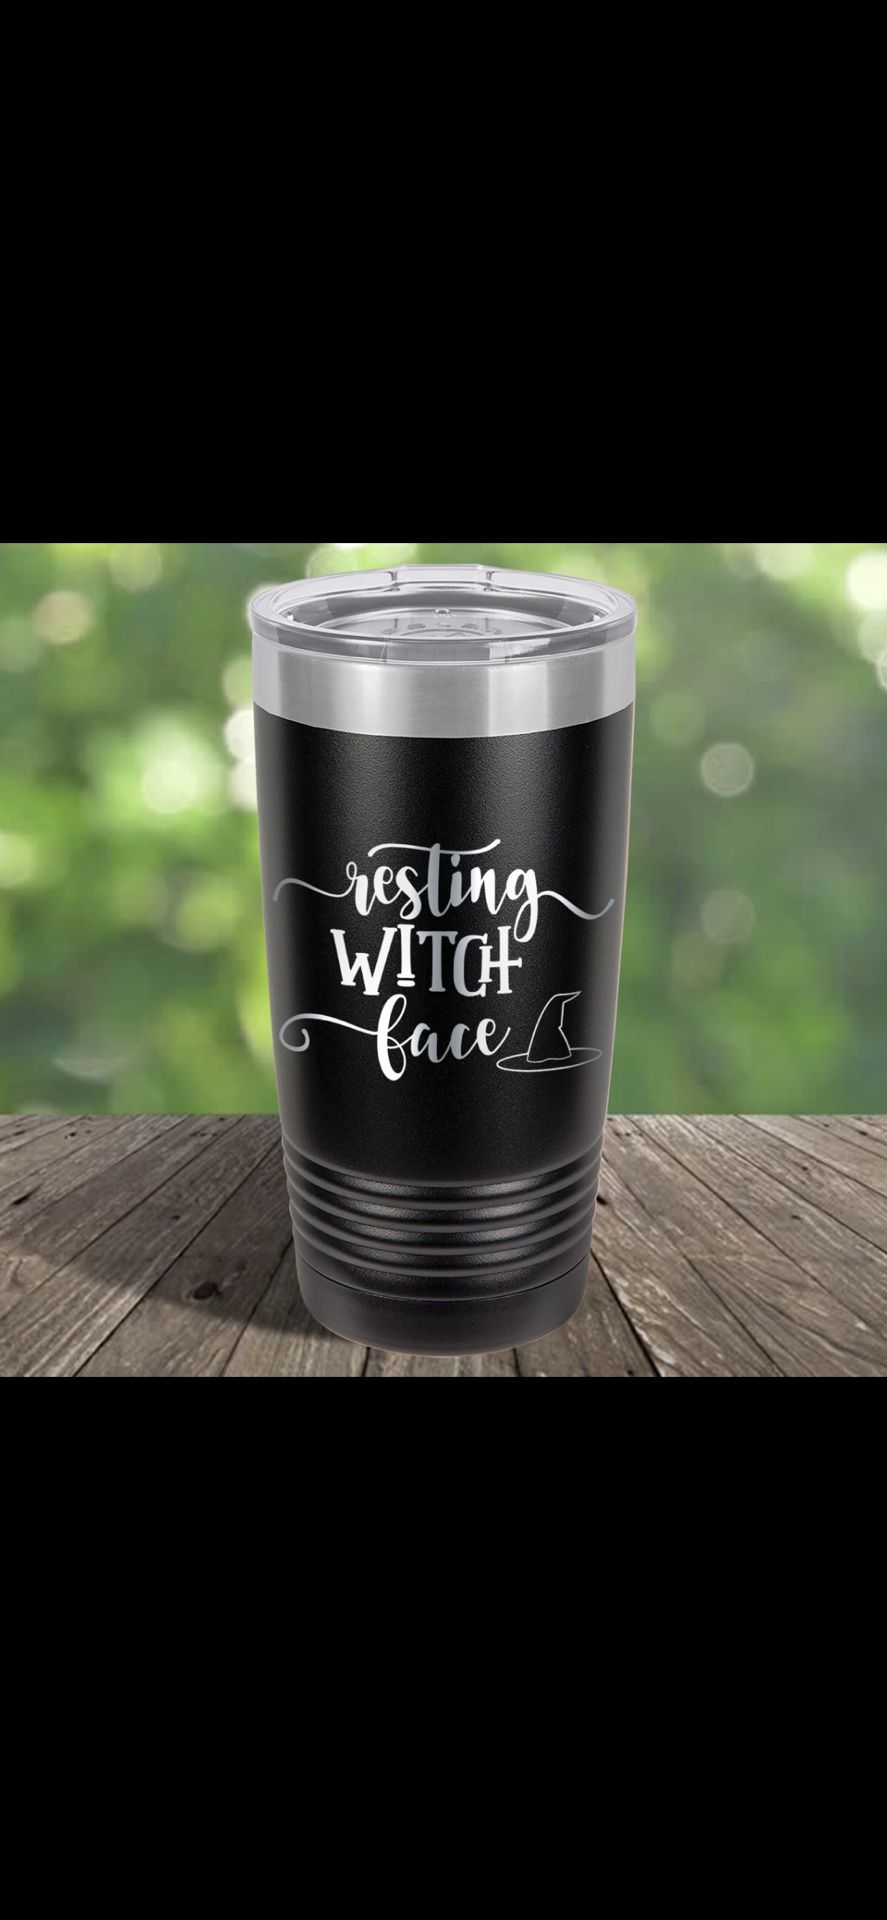 New! “Resting witch face” tumbler!